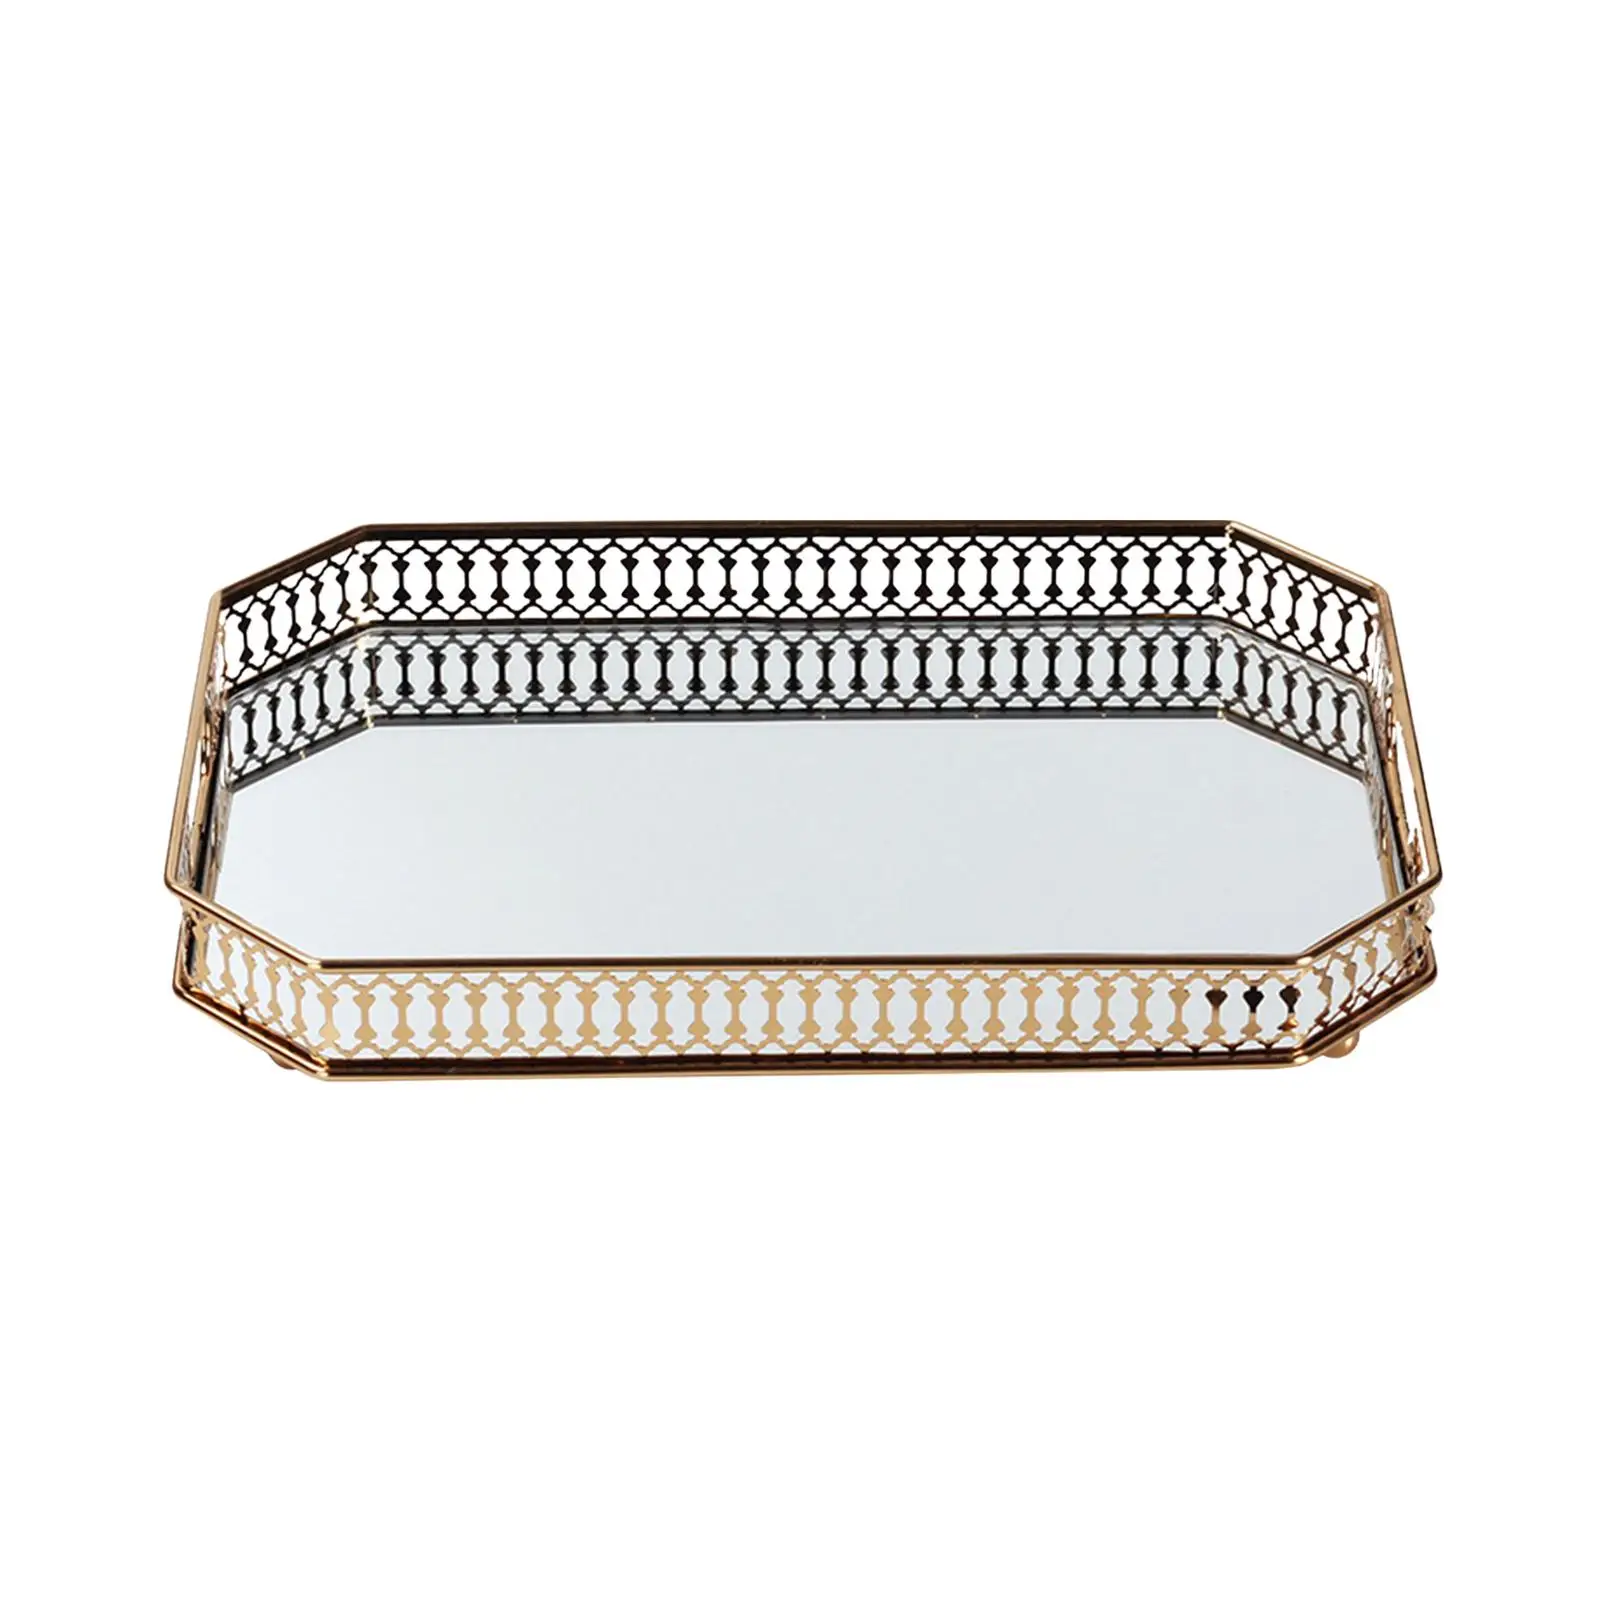 

Mirror Serving Tray Serving Plate Modern Decorative Mirrored Tray for Vanity for dessert Food Snack Cake Cosmetic Storage